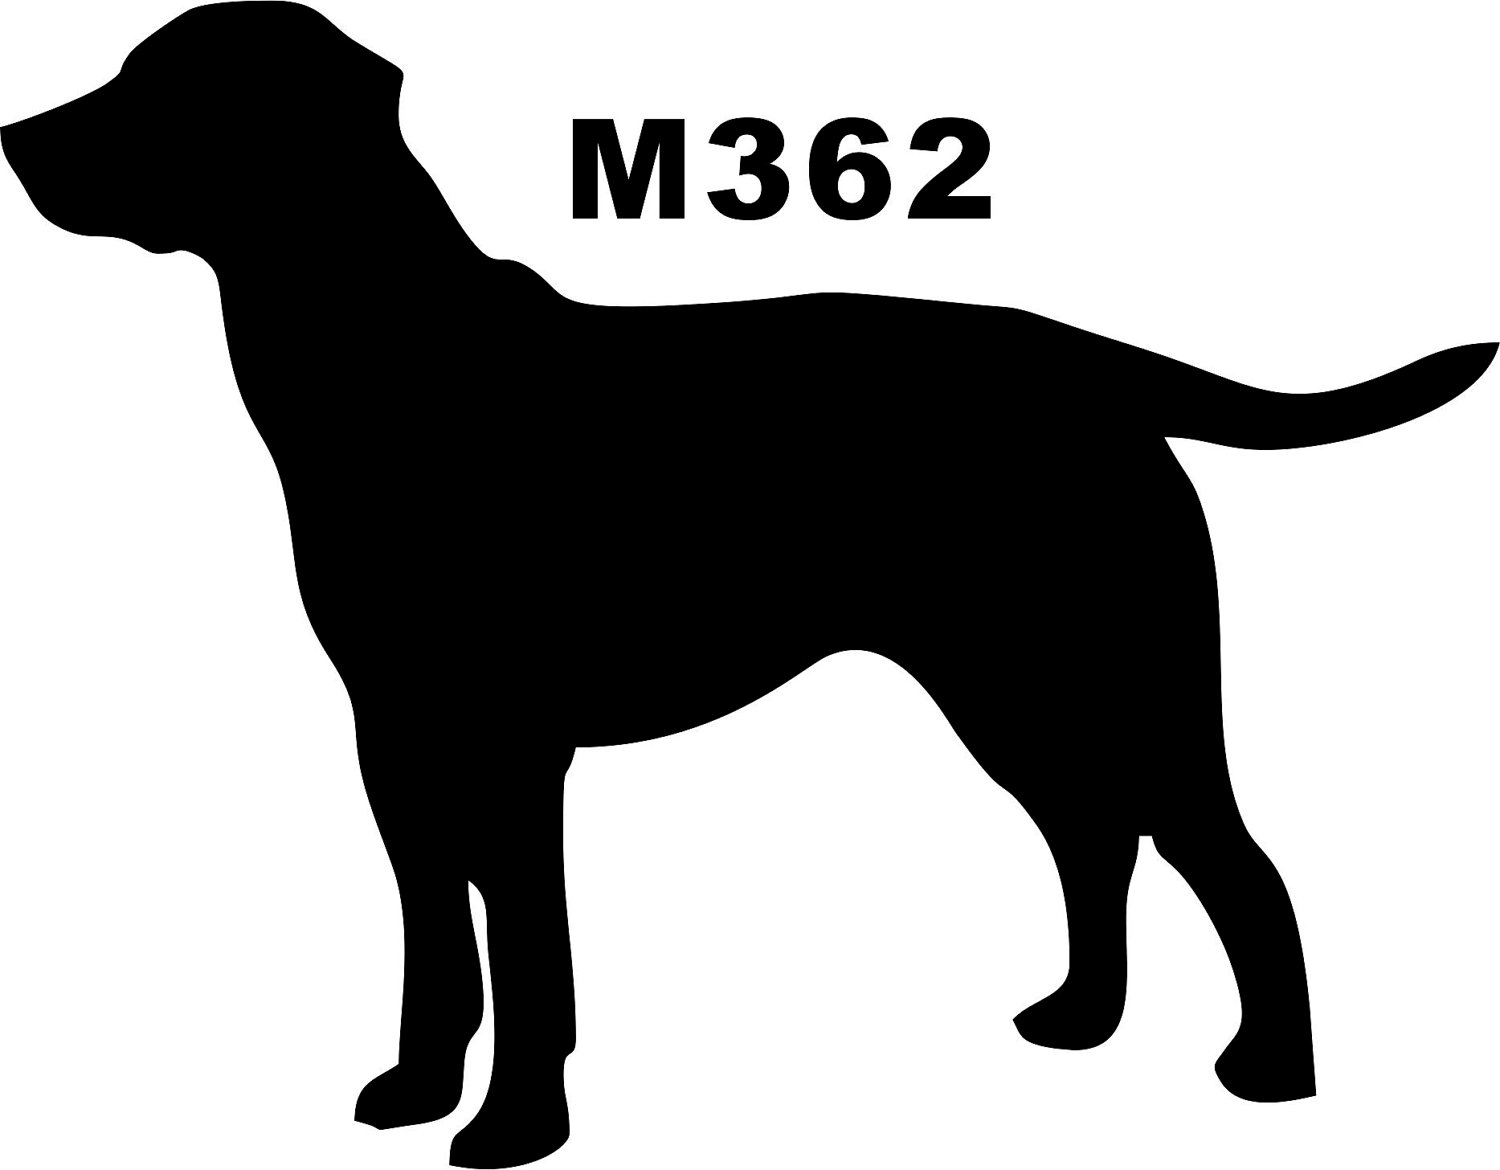 Dog black and white dog silhouette clip art black and white